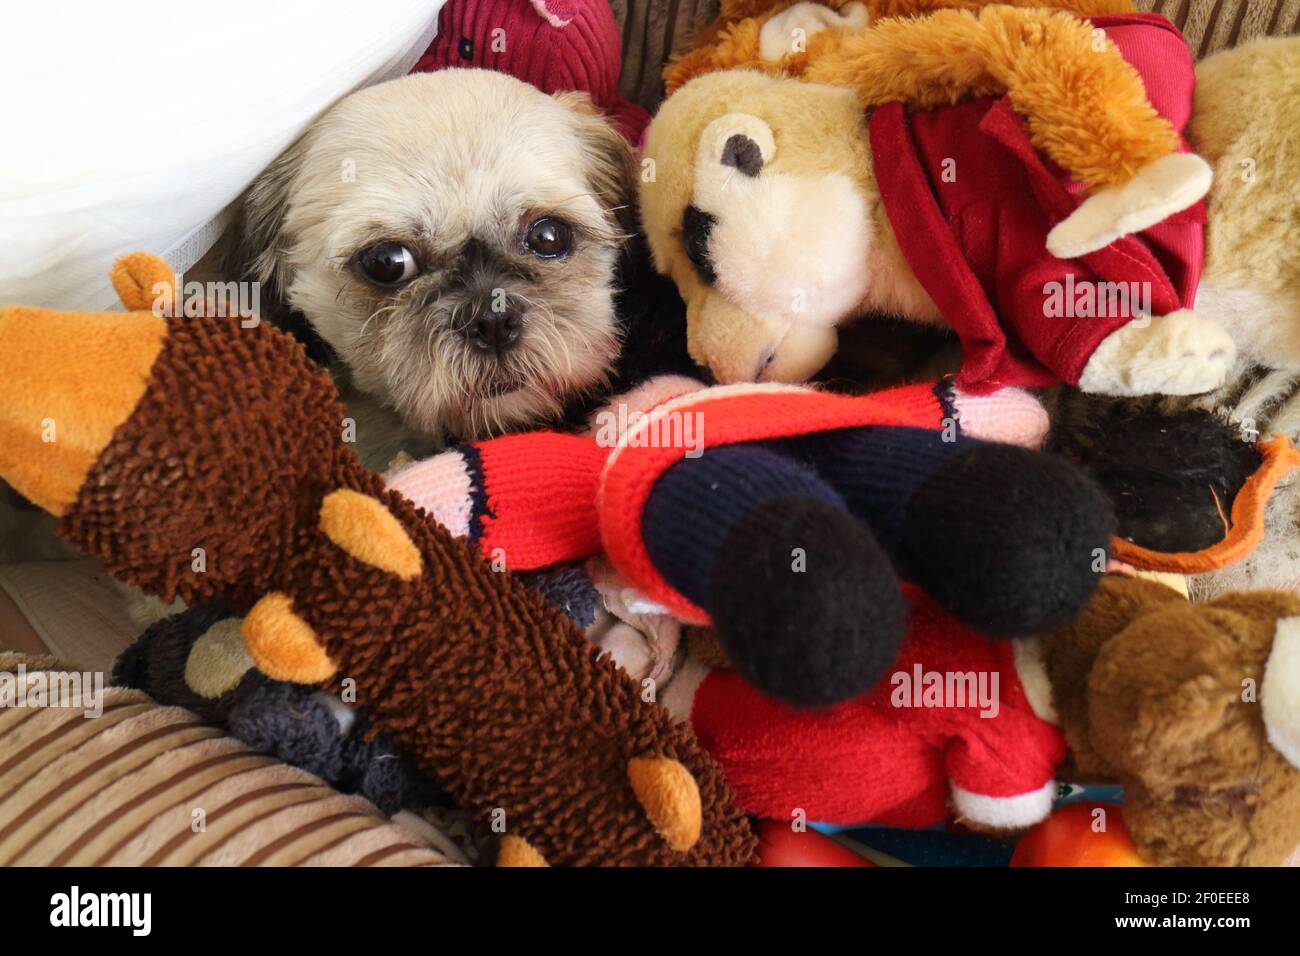 https://c8.alamy.com/comp/2F0EEE8/a-small-shih-tzu-dog-surrounded-by-his-cuddly-toys-2F0EEE8.jpg